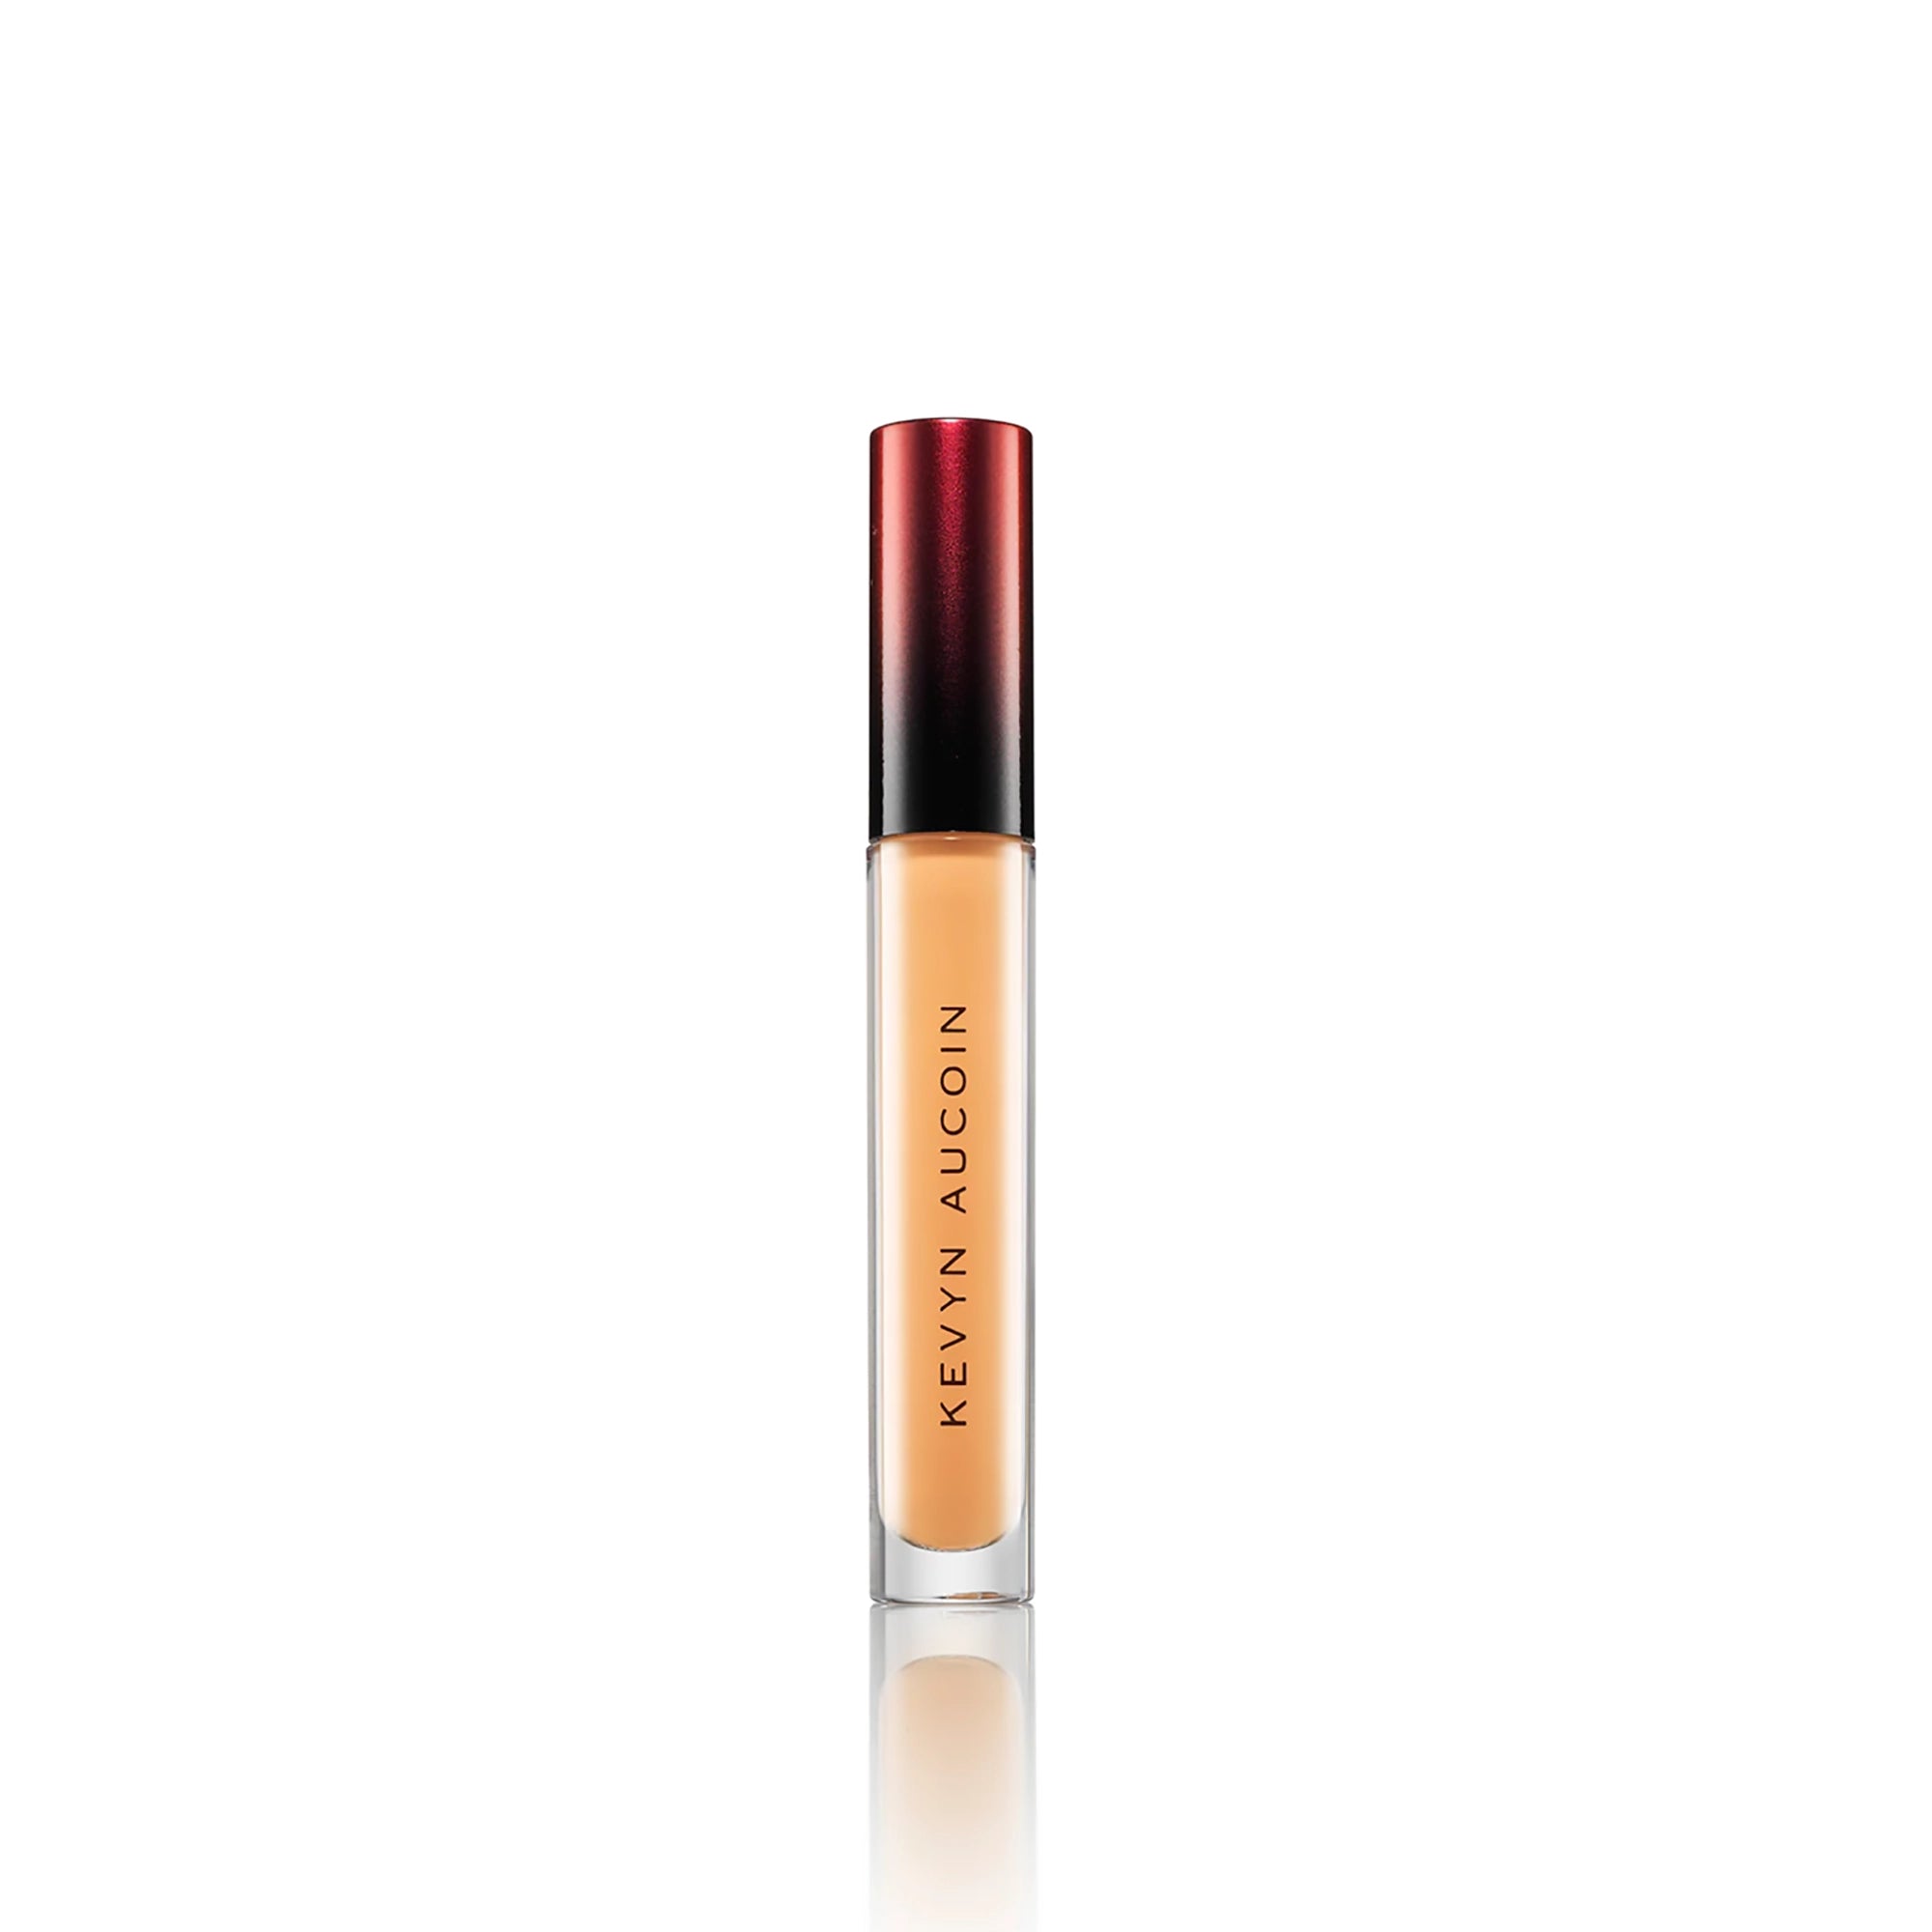 Kevyn Aucoin The Etherealist Super Natural Concealer / MEDIUM 5